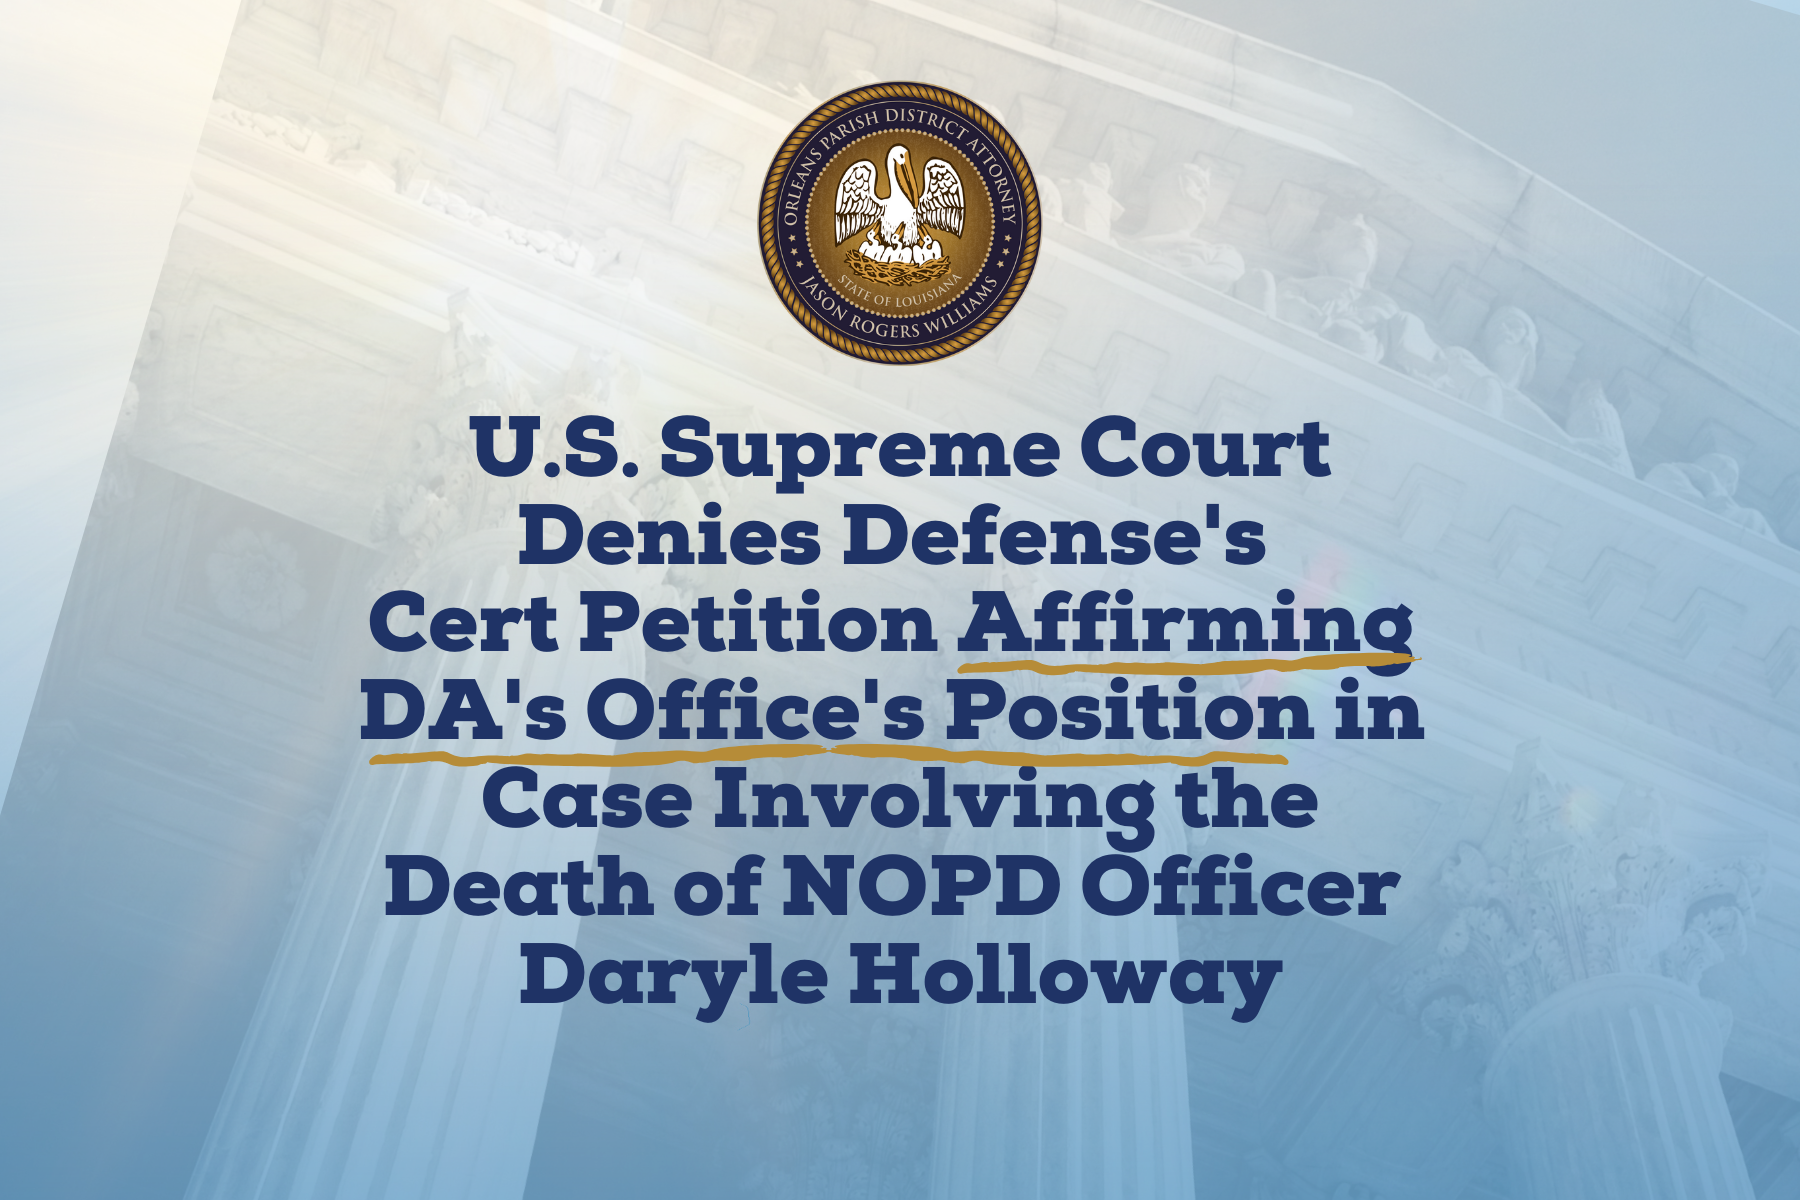 U.S. Supreme Court Denies Defense’s Cert Petition Affirming DA’s Office’s Position In Case Involving Death Of Officer Holloway